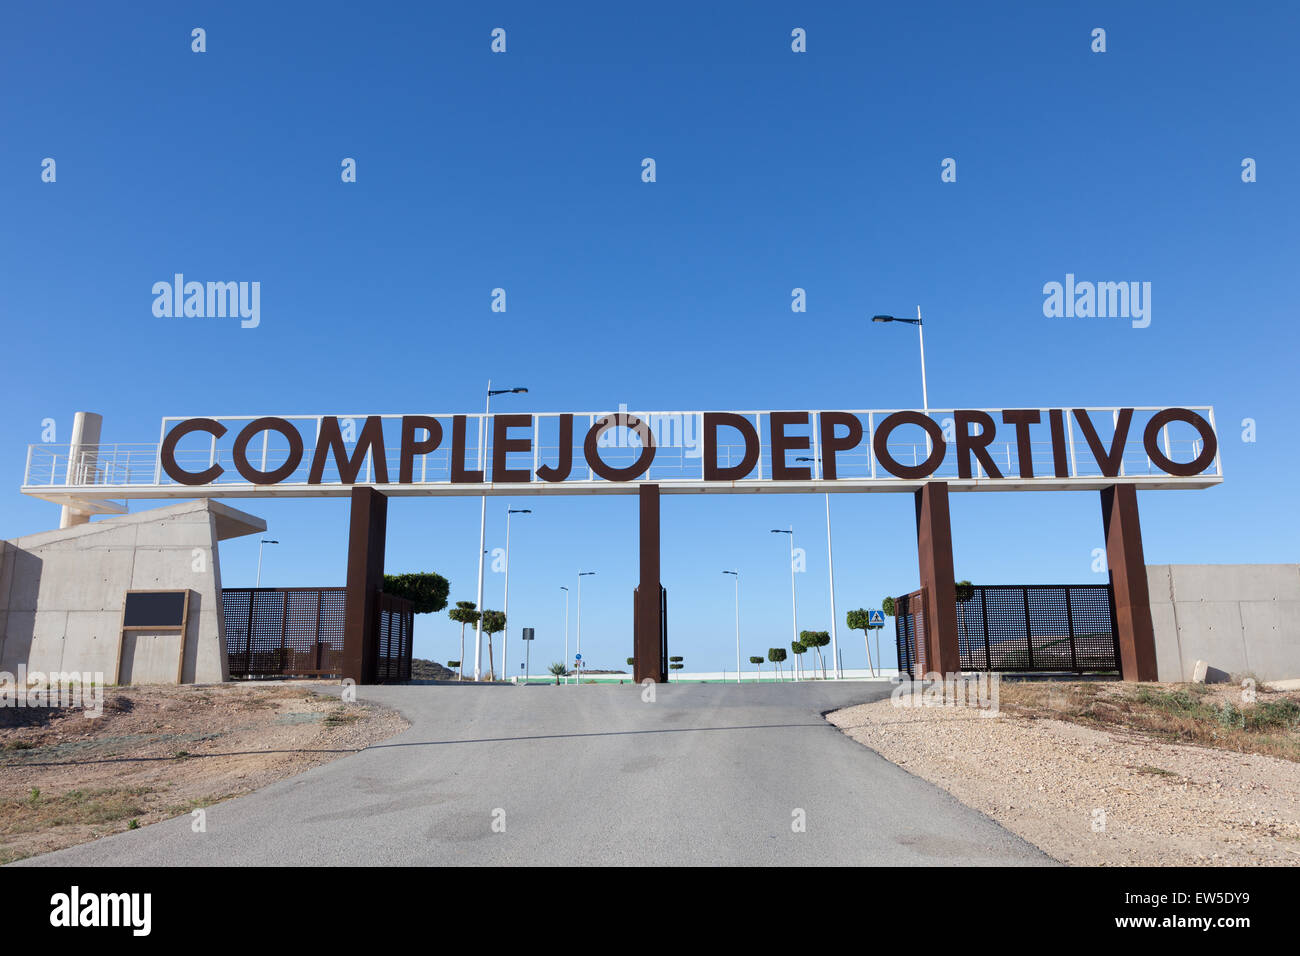 Complejo Deportivo - spanish for sports facilities Stock Photo